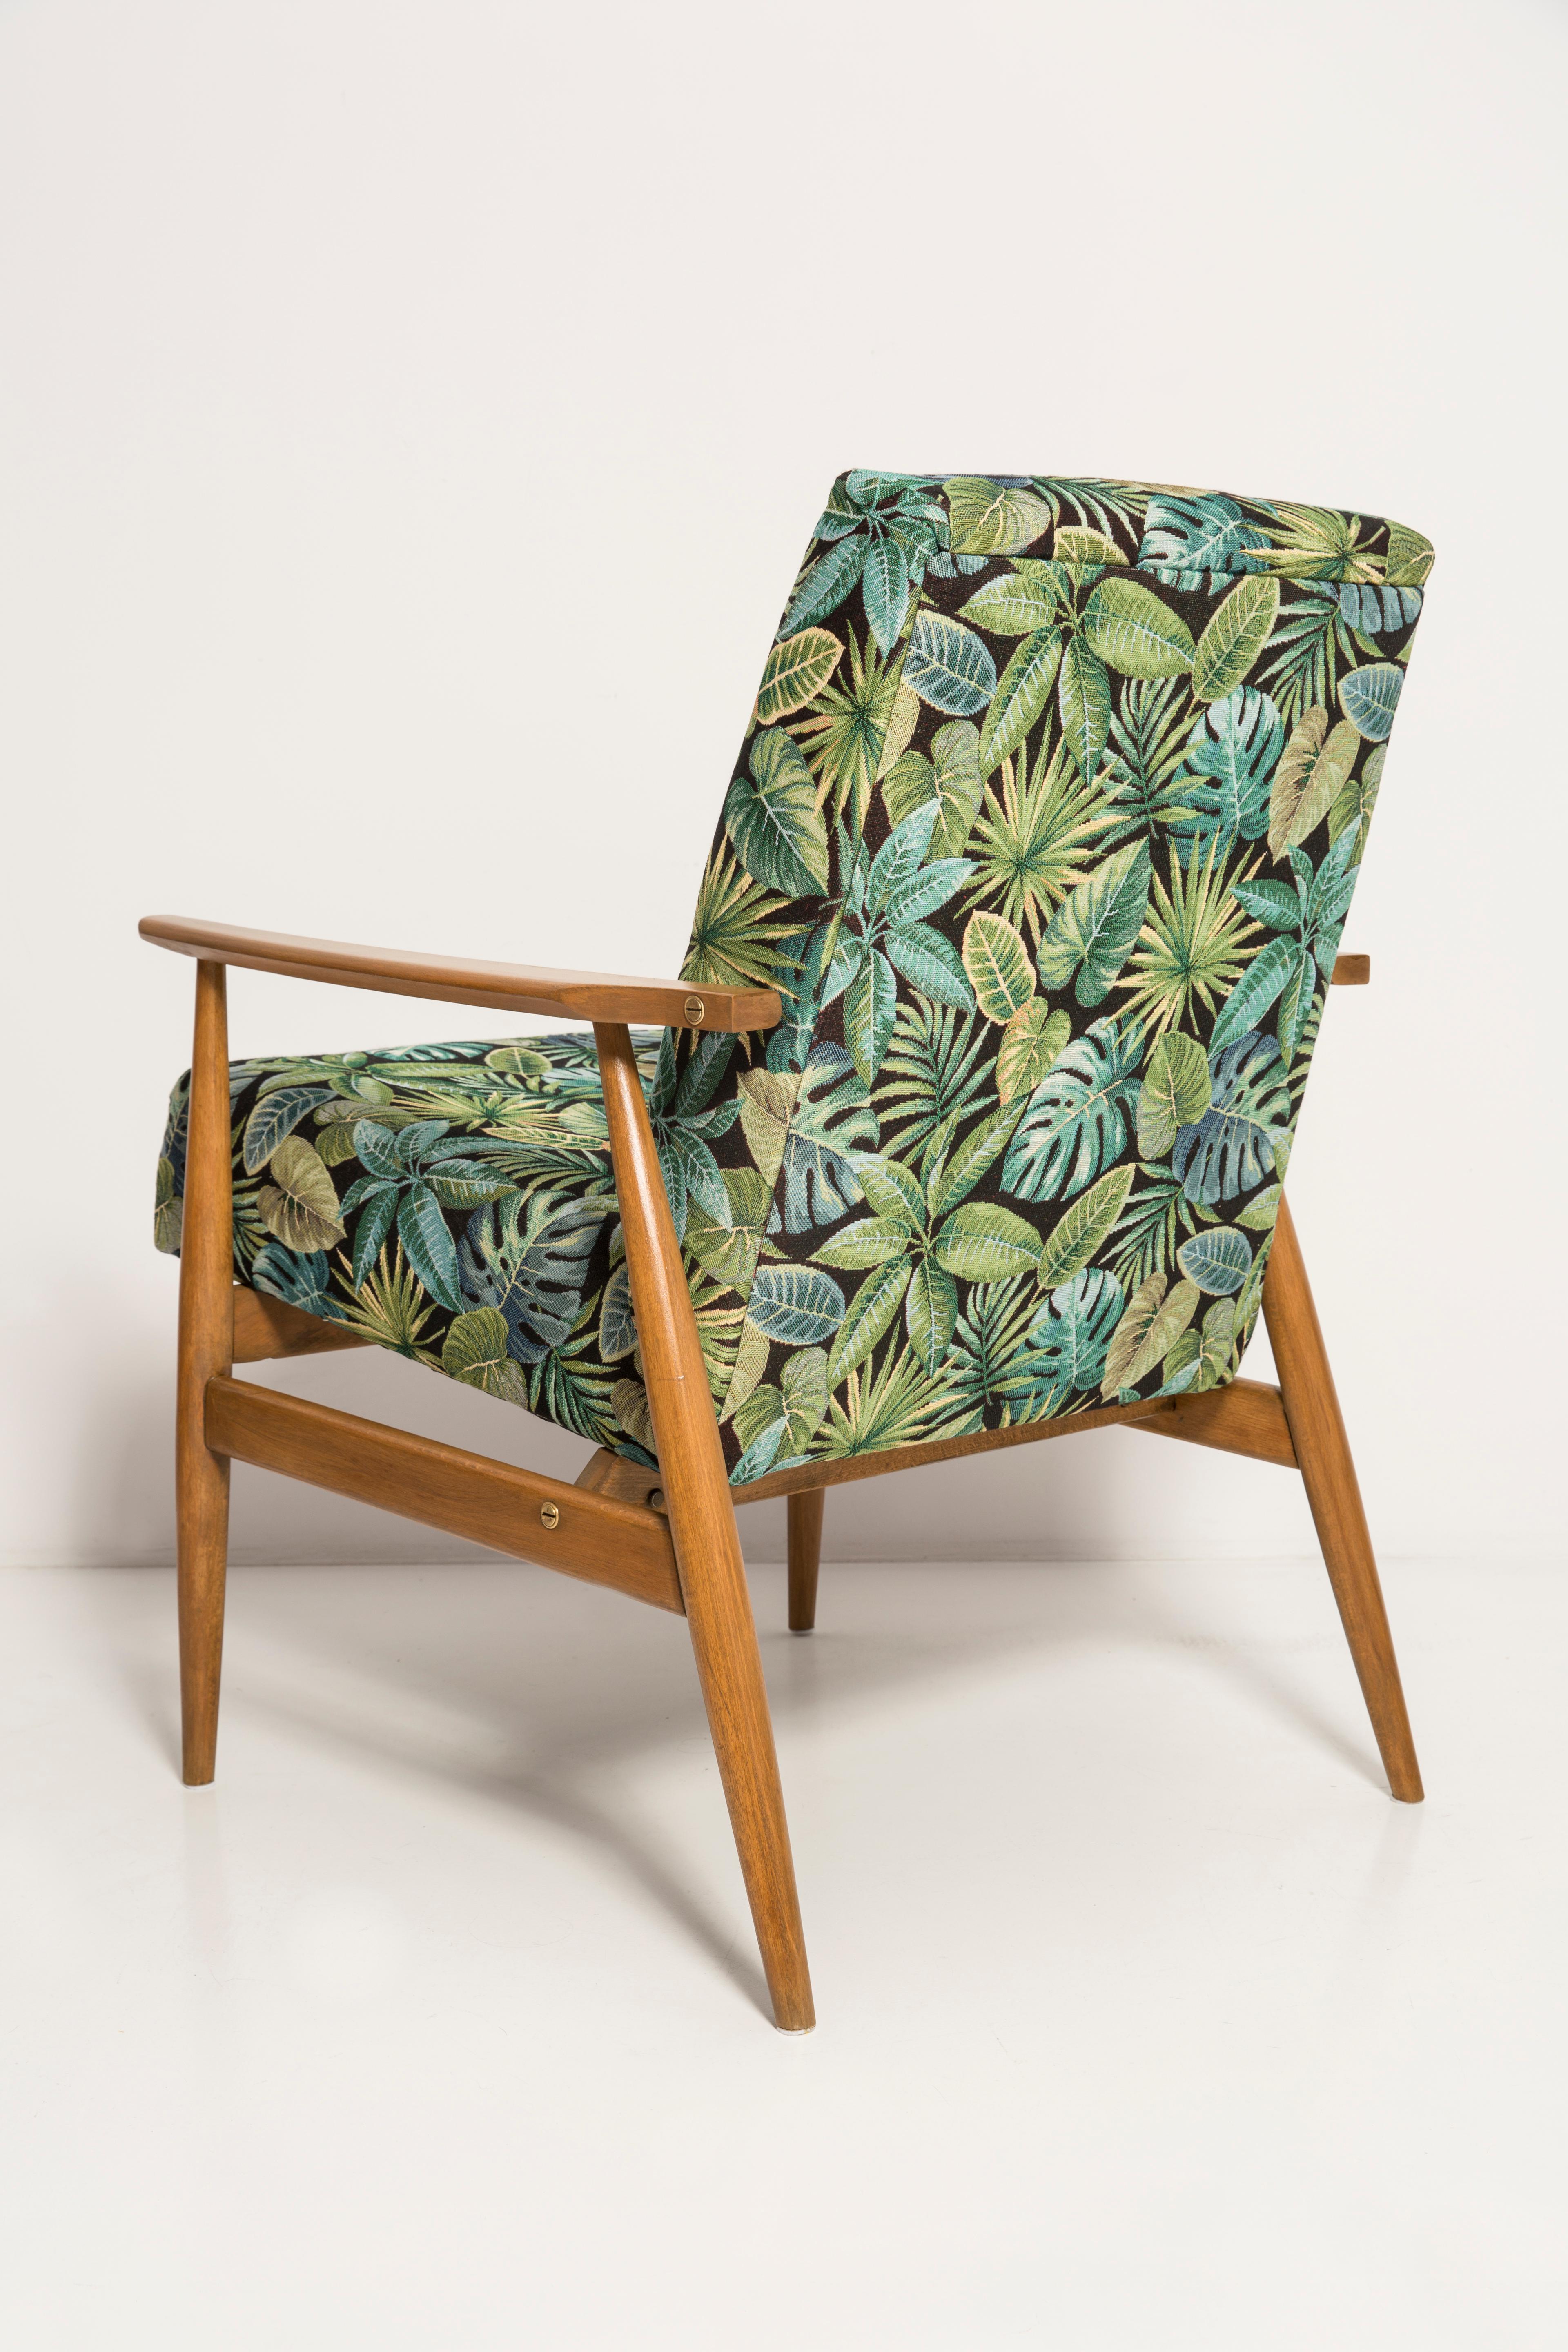 Pair of Mid-Century Green Leaves Jacquard Dante Armchairs, H. Lis, 1960s For Sale 6